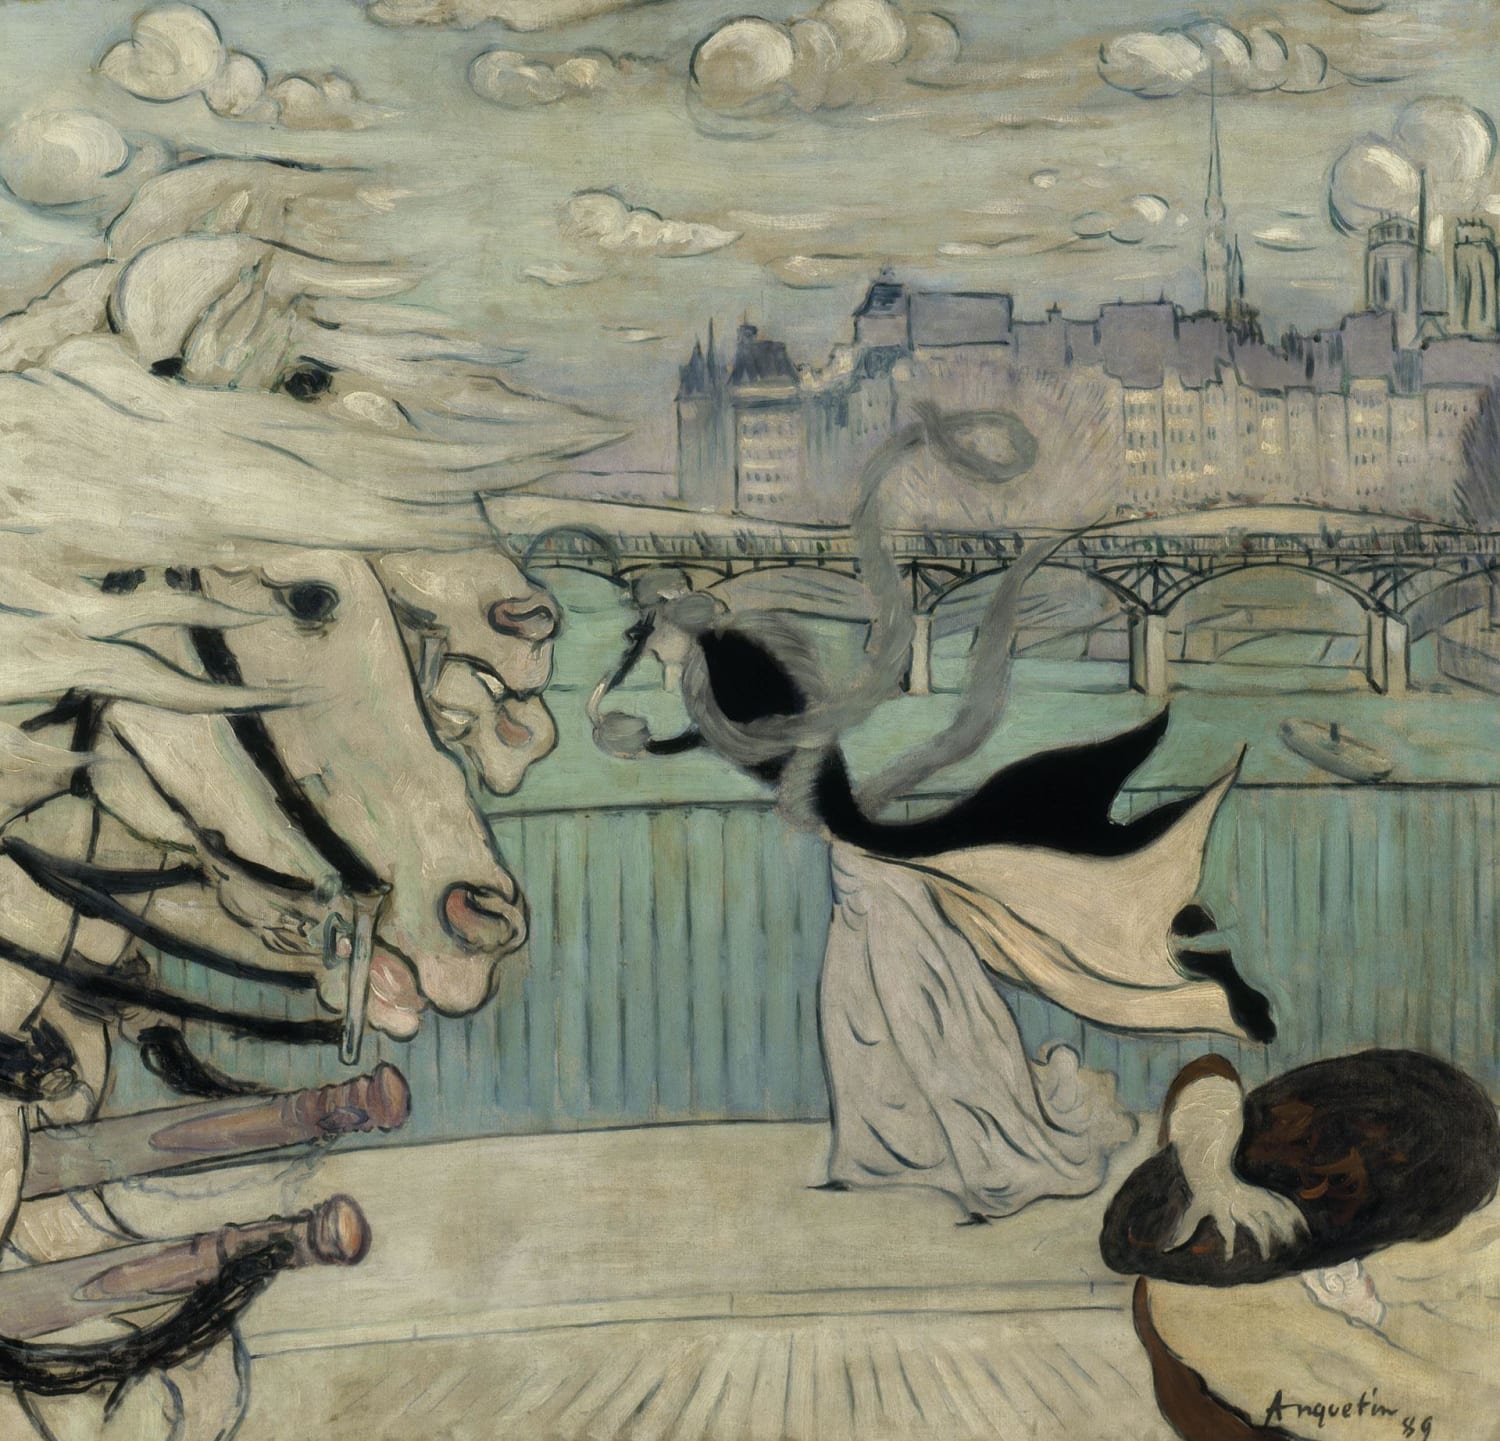 Louis Anquetin, Wind blows on the holy fathers bridge, 1889